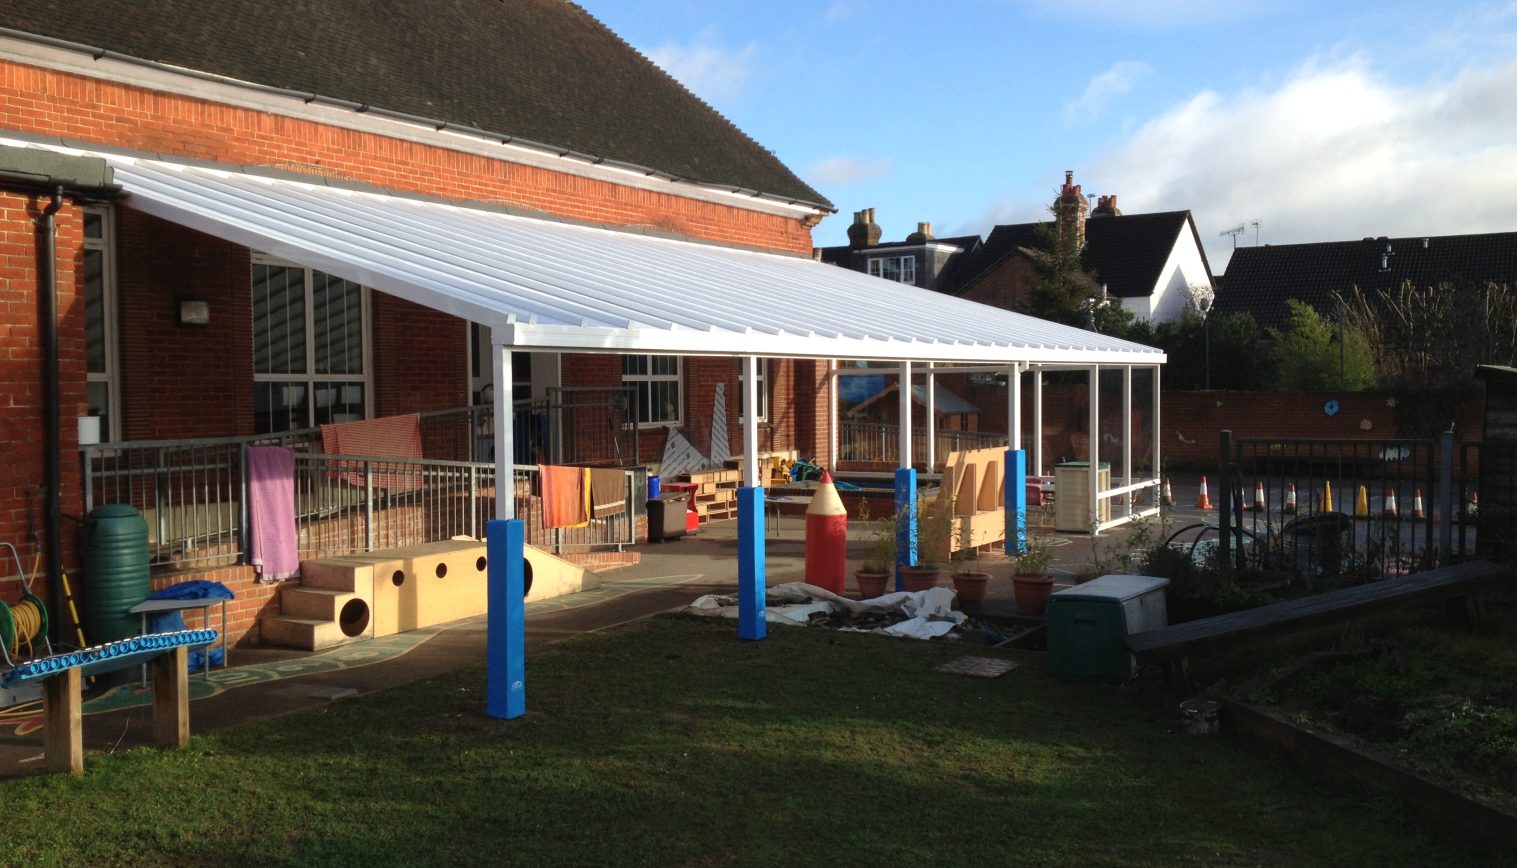 Stoughton Infant School – Wall Mounted Canopy